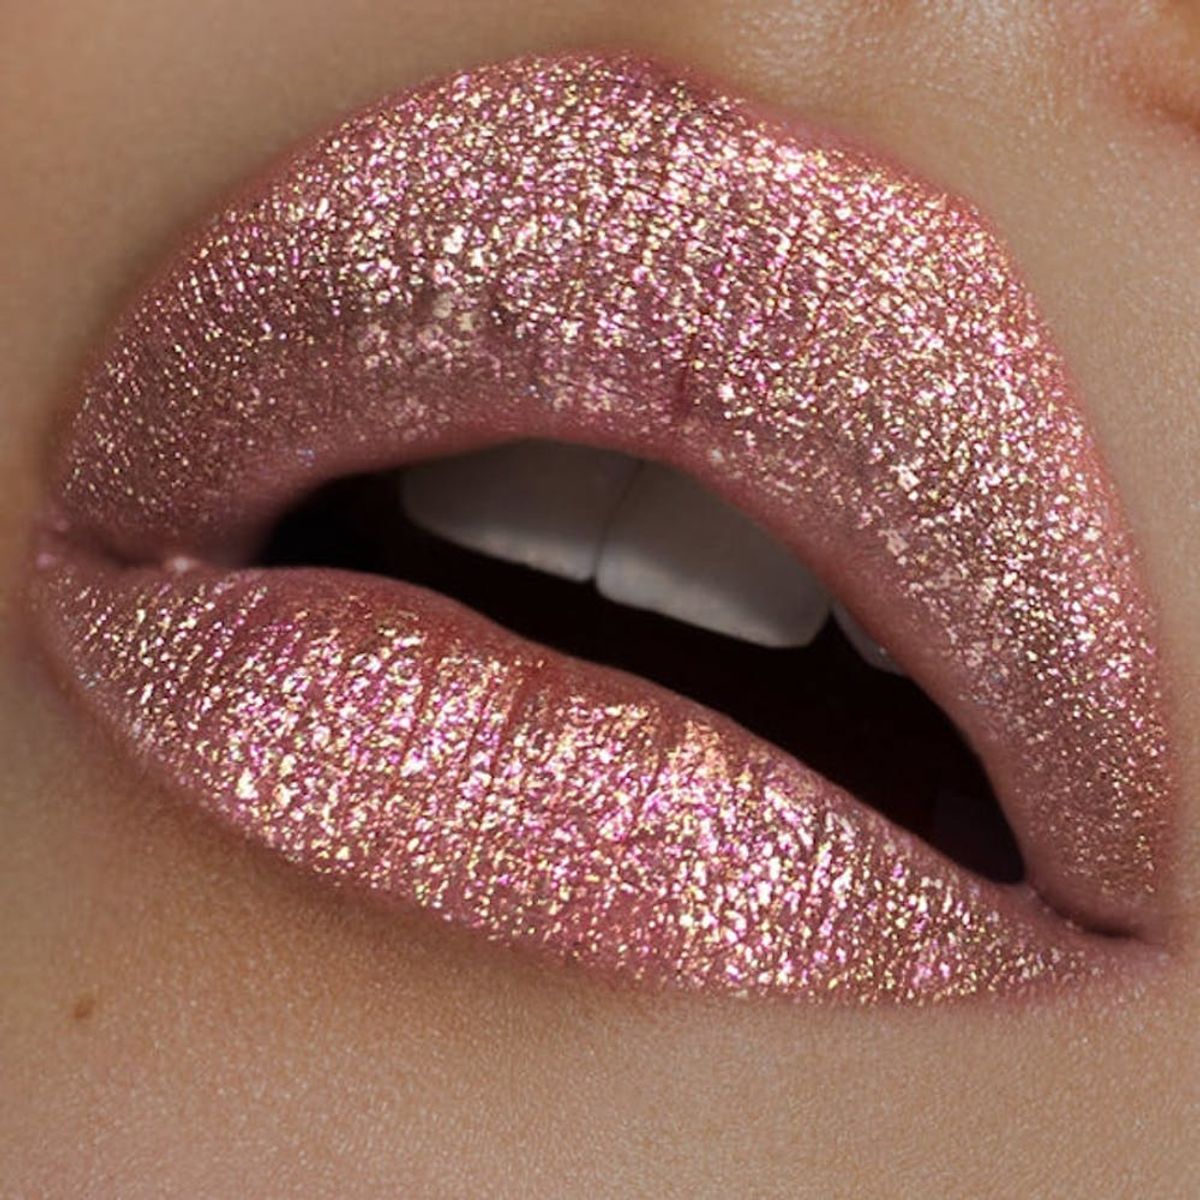 Lime Crime Is Adding 3 New Glittery Lip Topcoats to Their Lineup